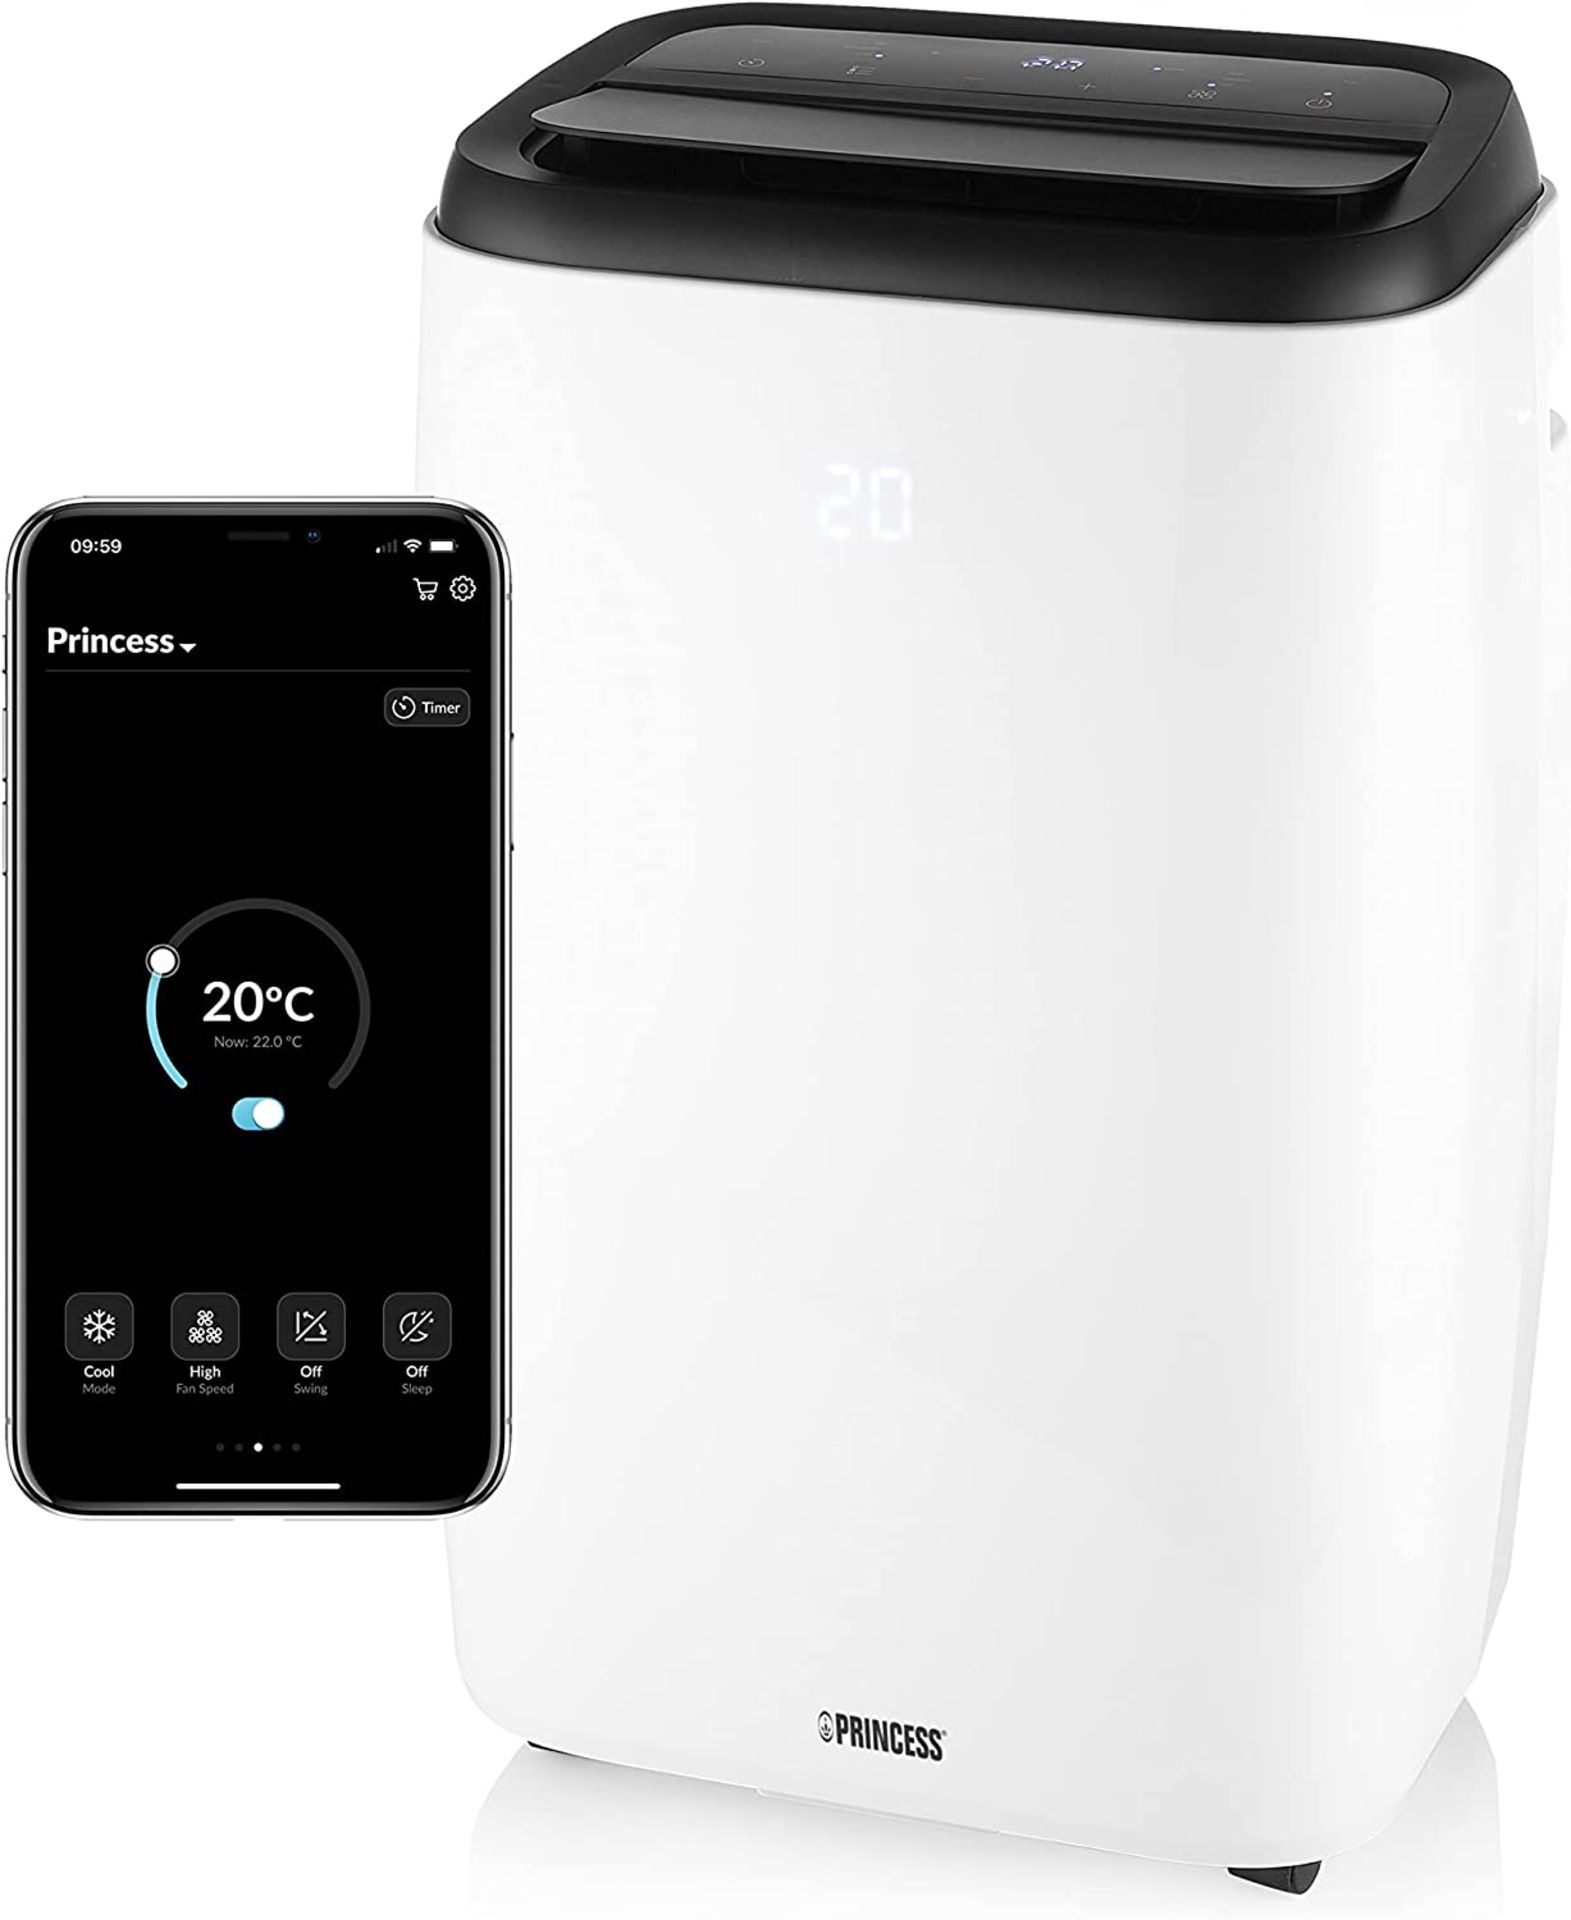 Princess Mobile Air Conditioner. 3 IN 1 SMART WIFI. 12,000 BTU, Smart and Voice Control, 3.5 kW,